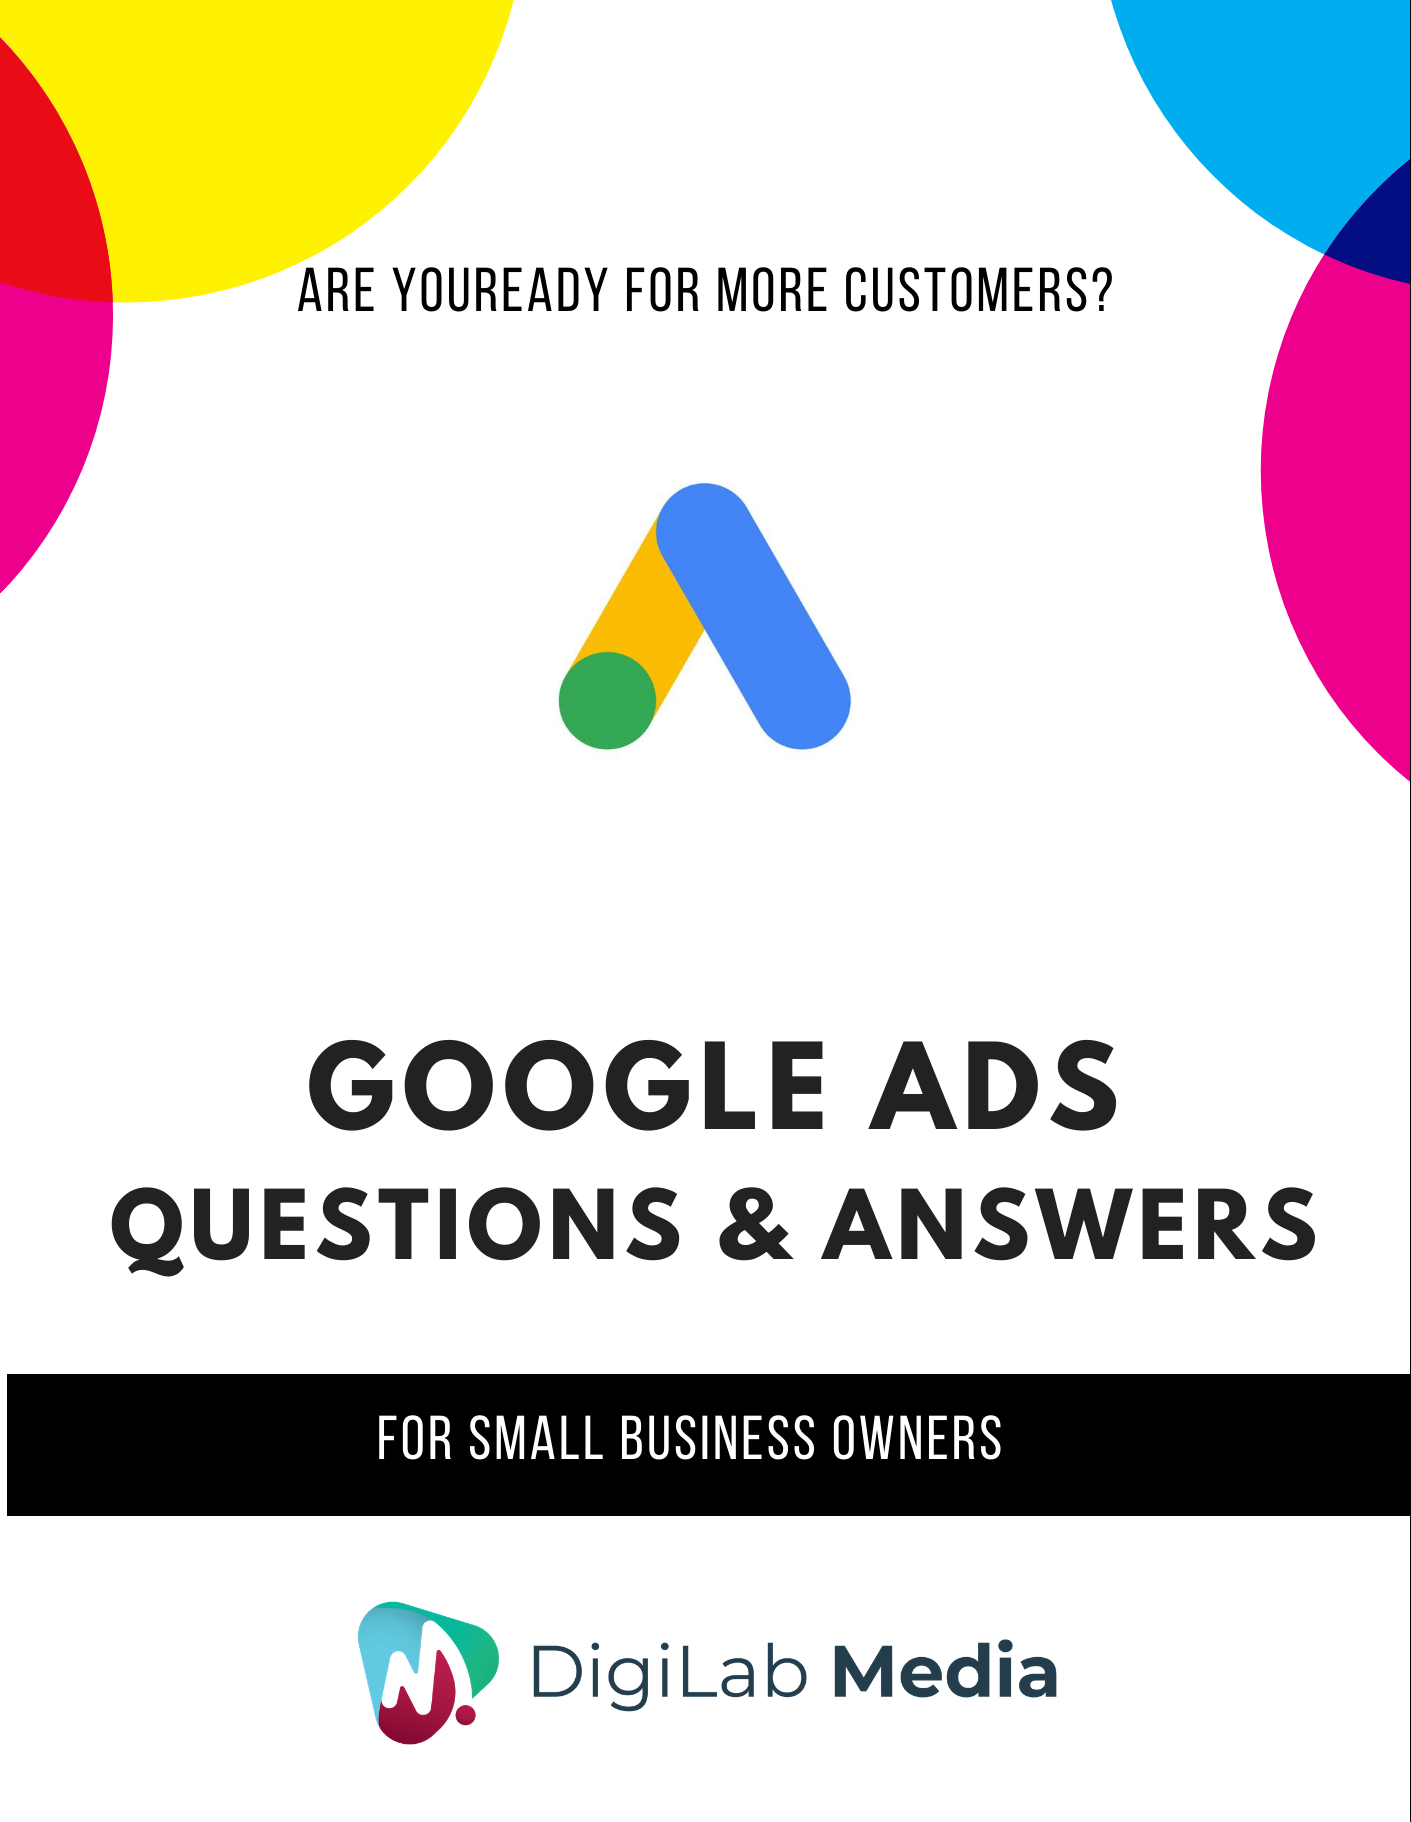 Google Ads Questions & Answers (1)